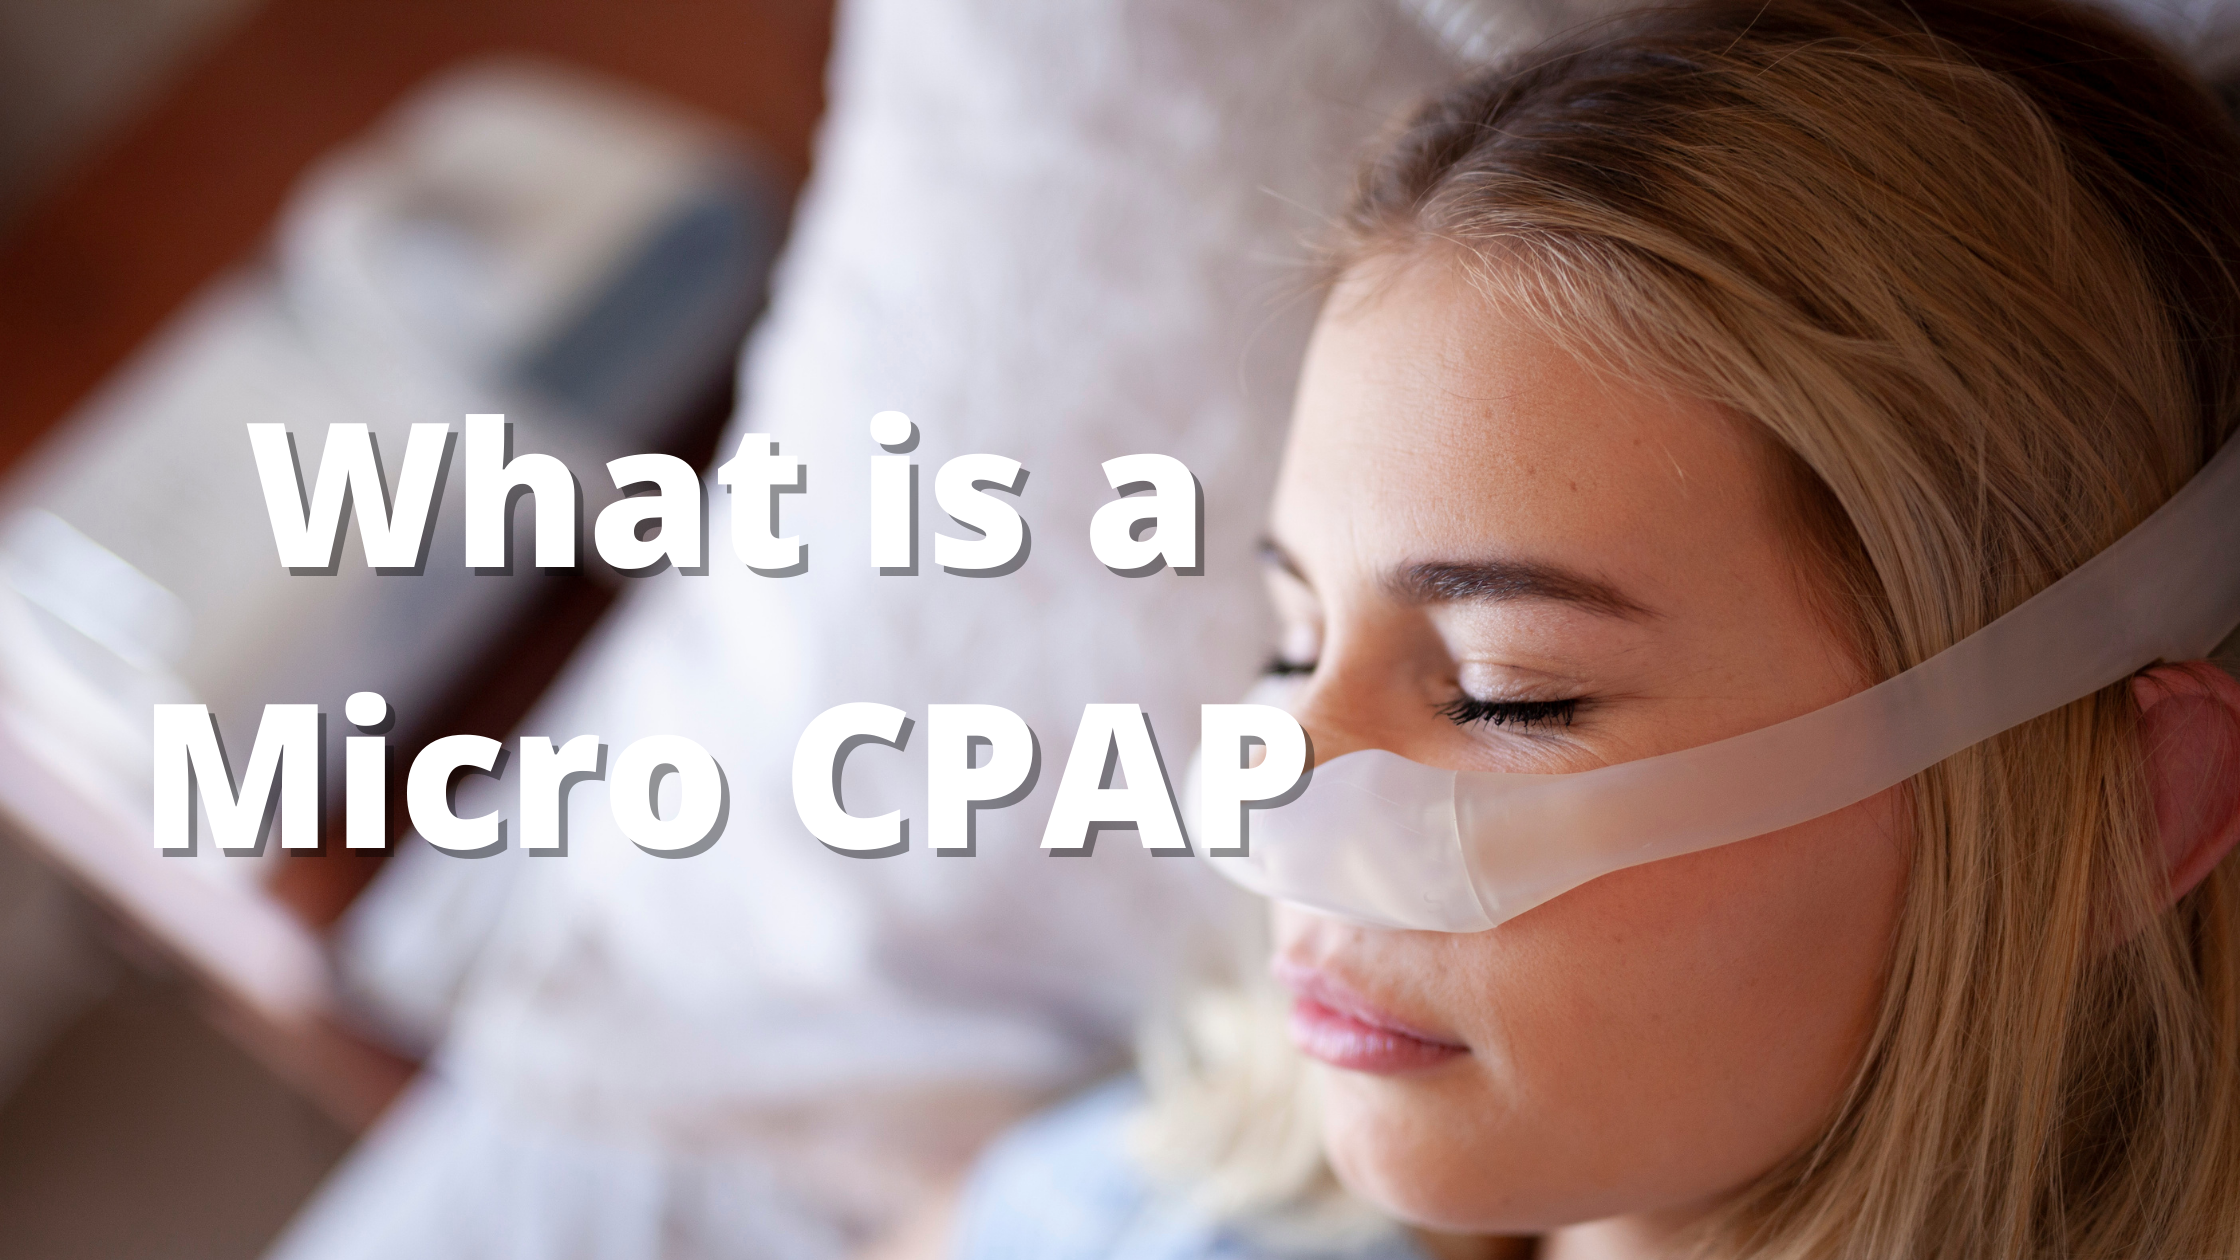 Micro CPAP Devices